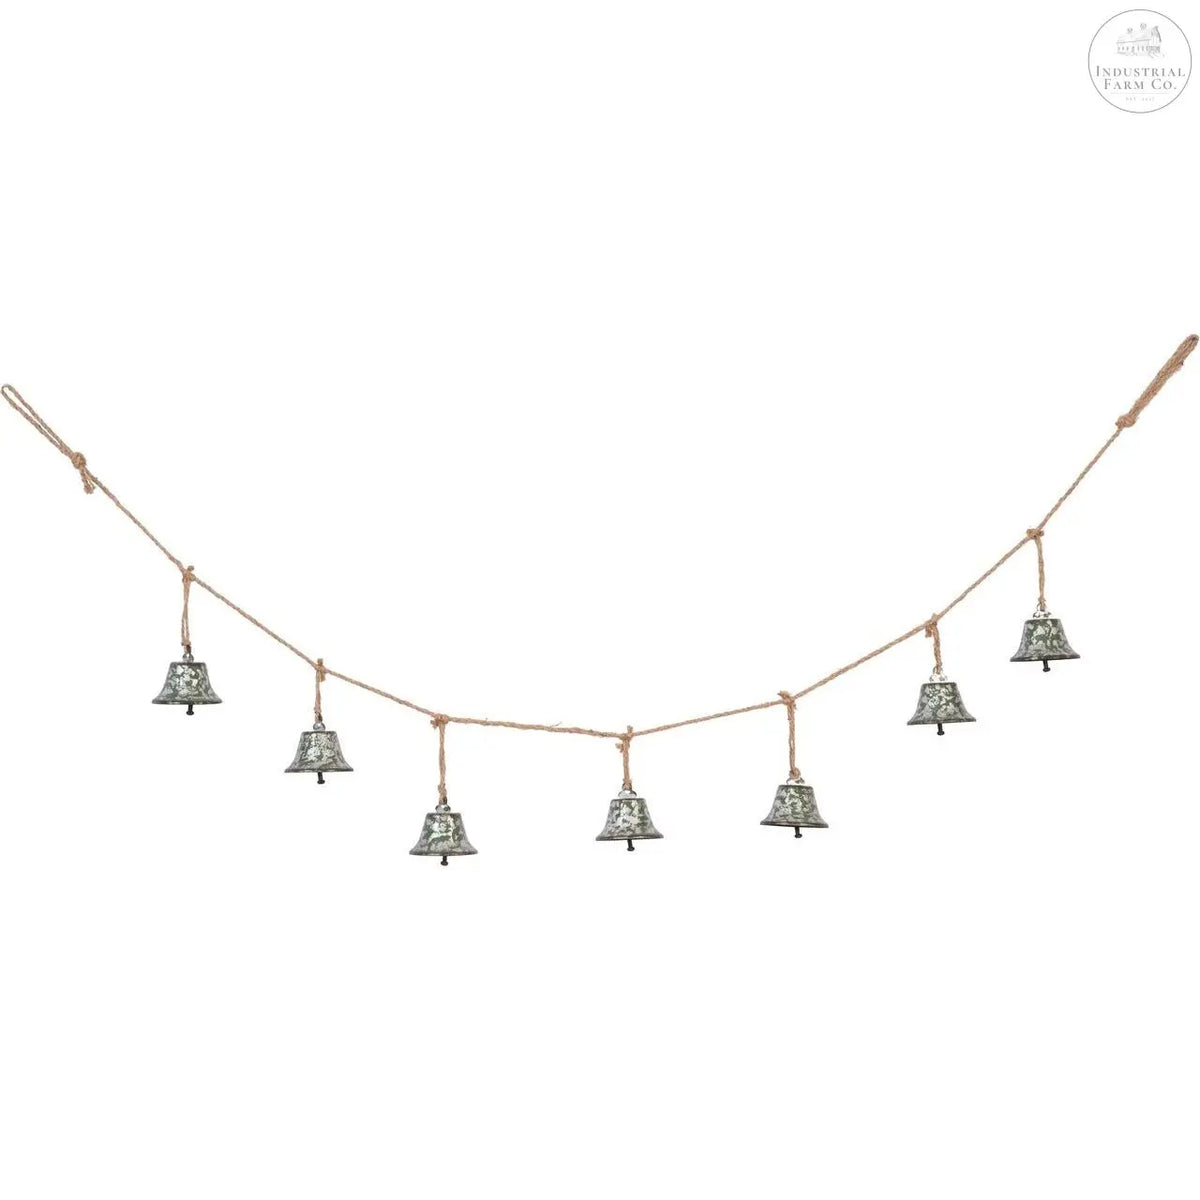 Silver Metal Christmas Bell Banner  Default Title   | Industrial Farm Co